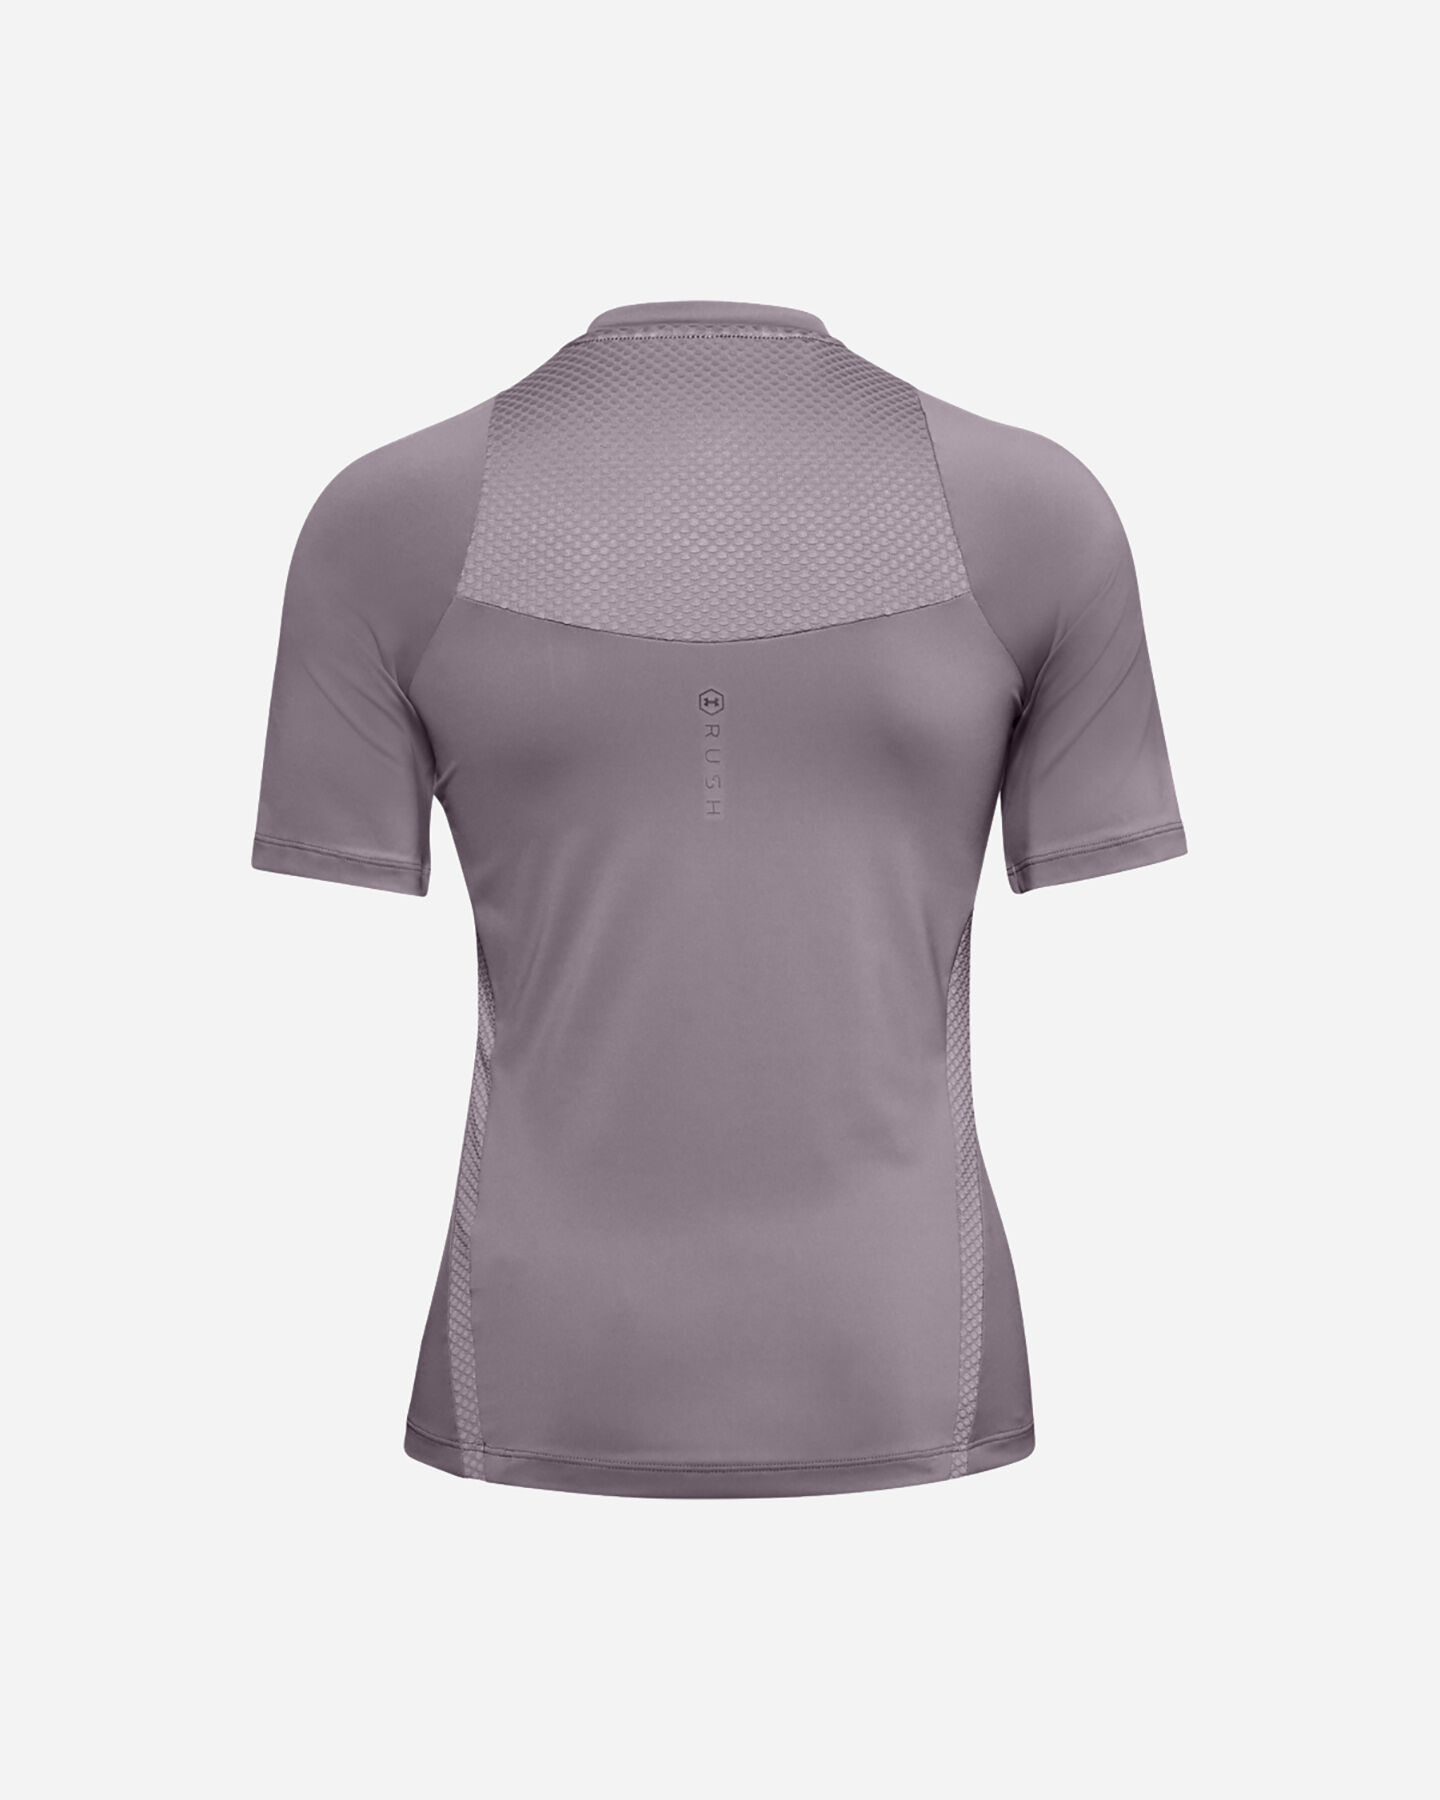  T-Shirt training UNDER ARMOUR RUSH W S5228946|0585|XS scatto 1